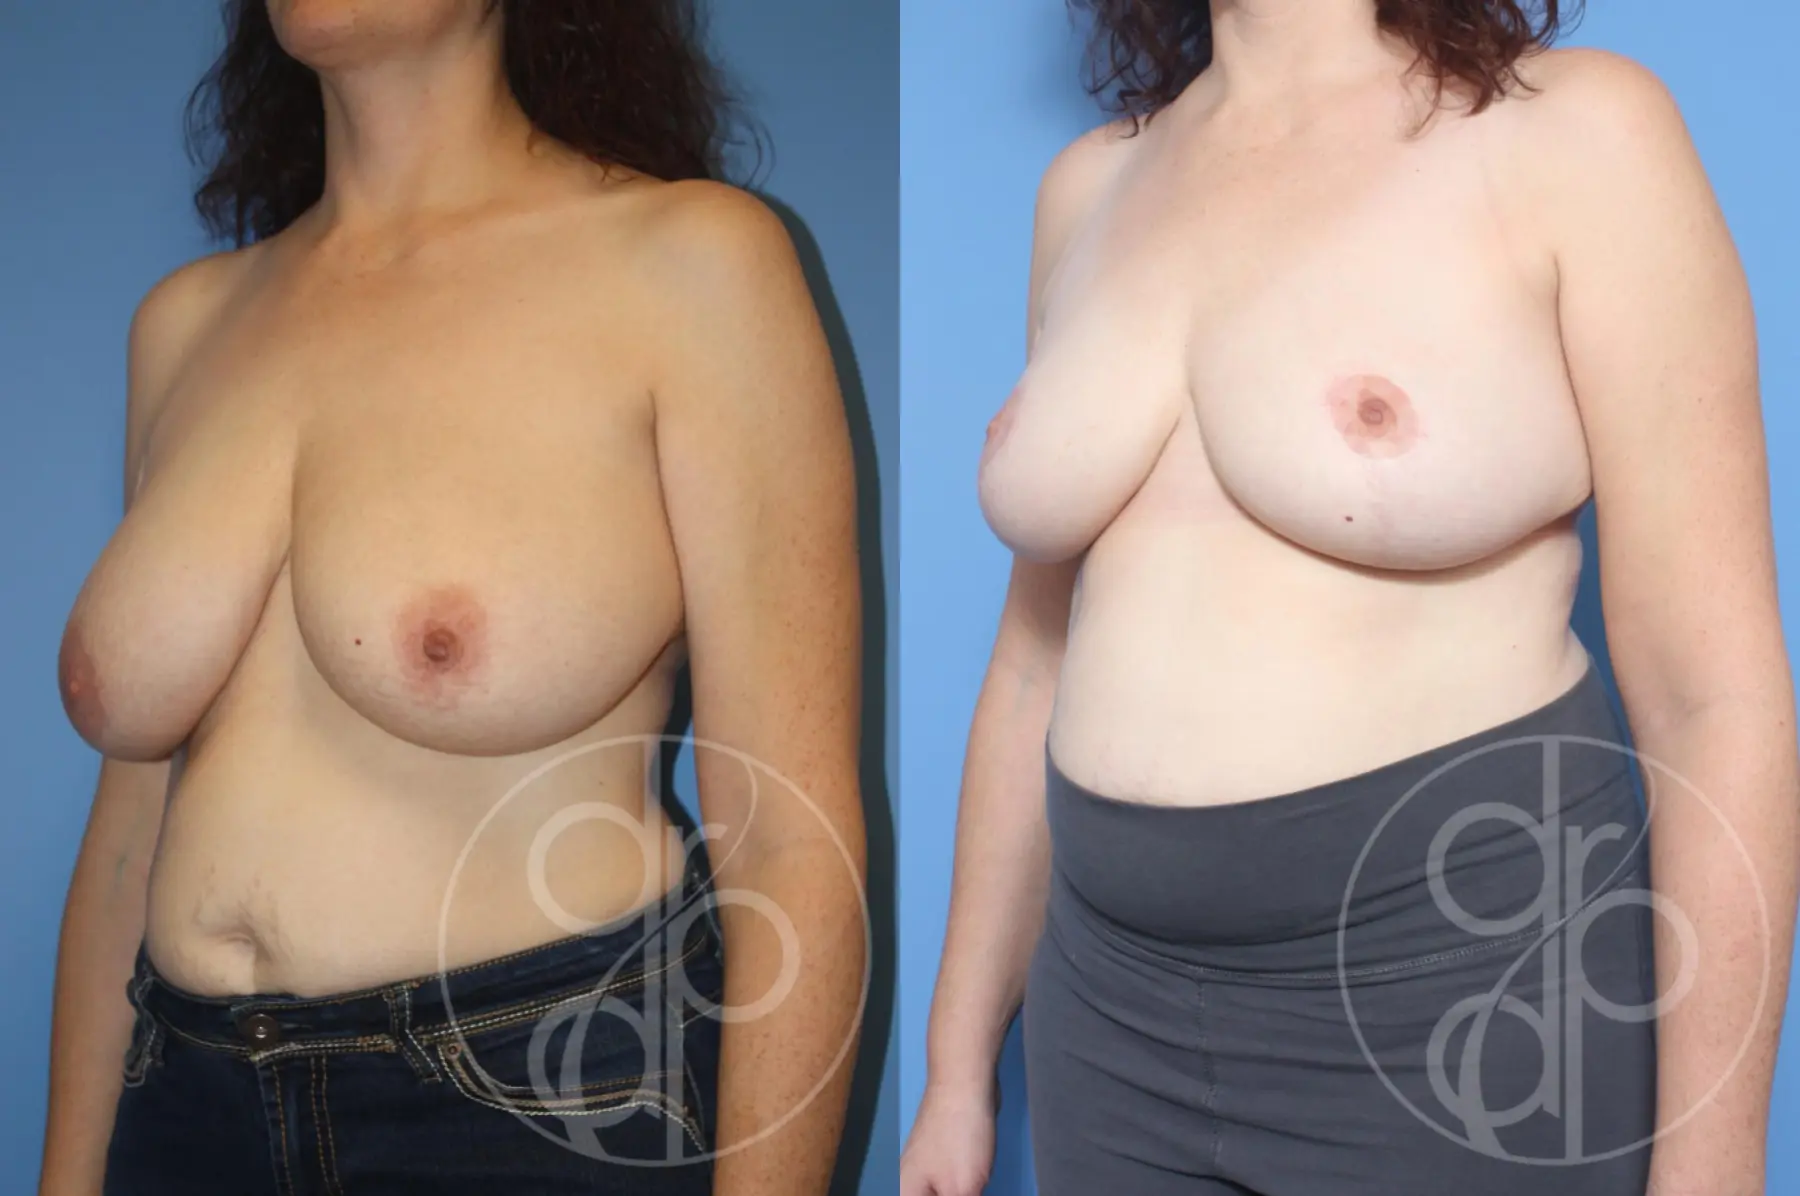 Breast Reduction: Patient 9 - Before and After 3